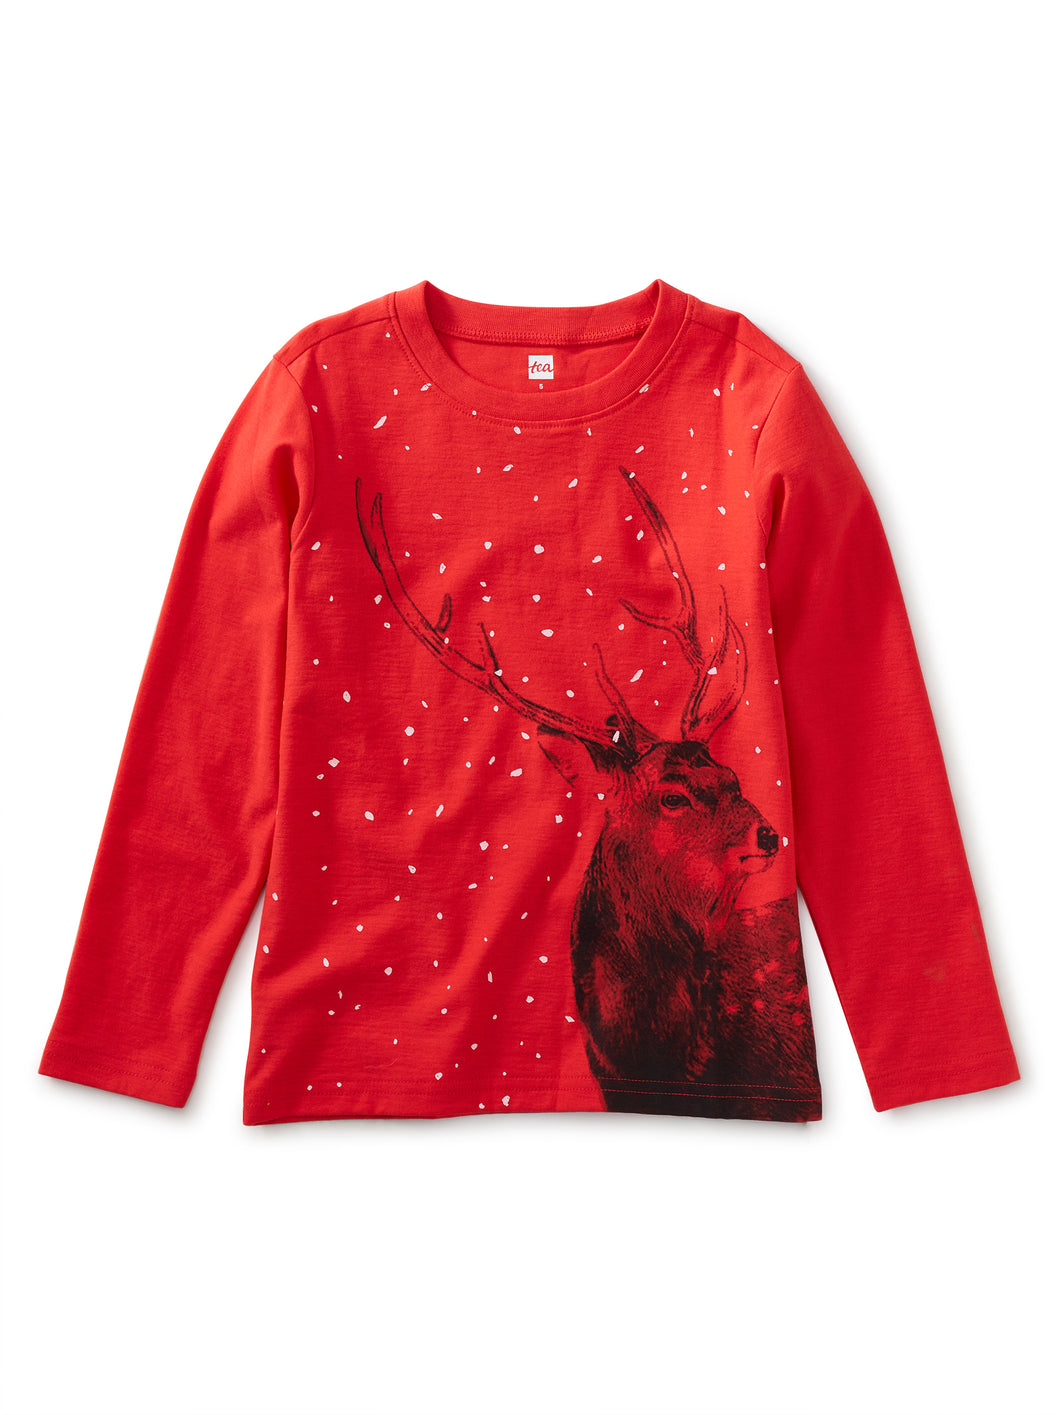 Oh Deer Graphic Tee Red Pepper